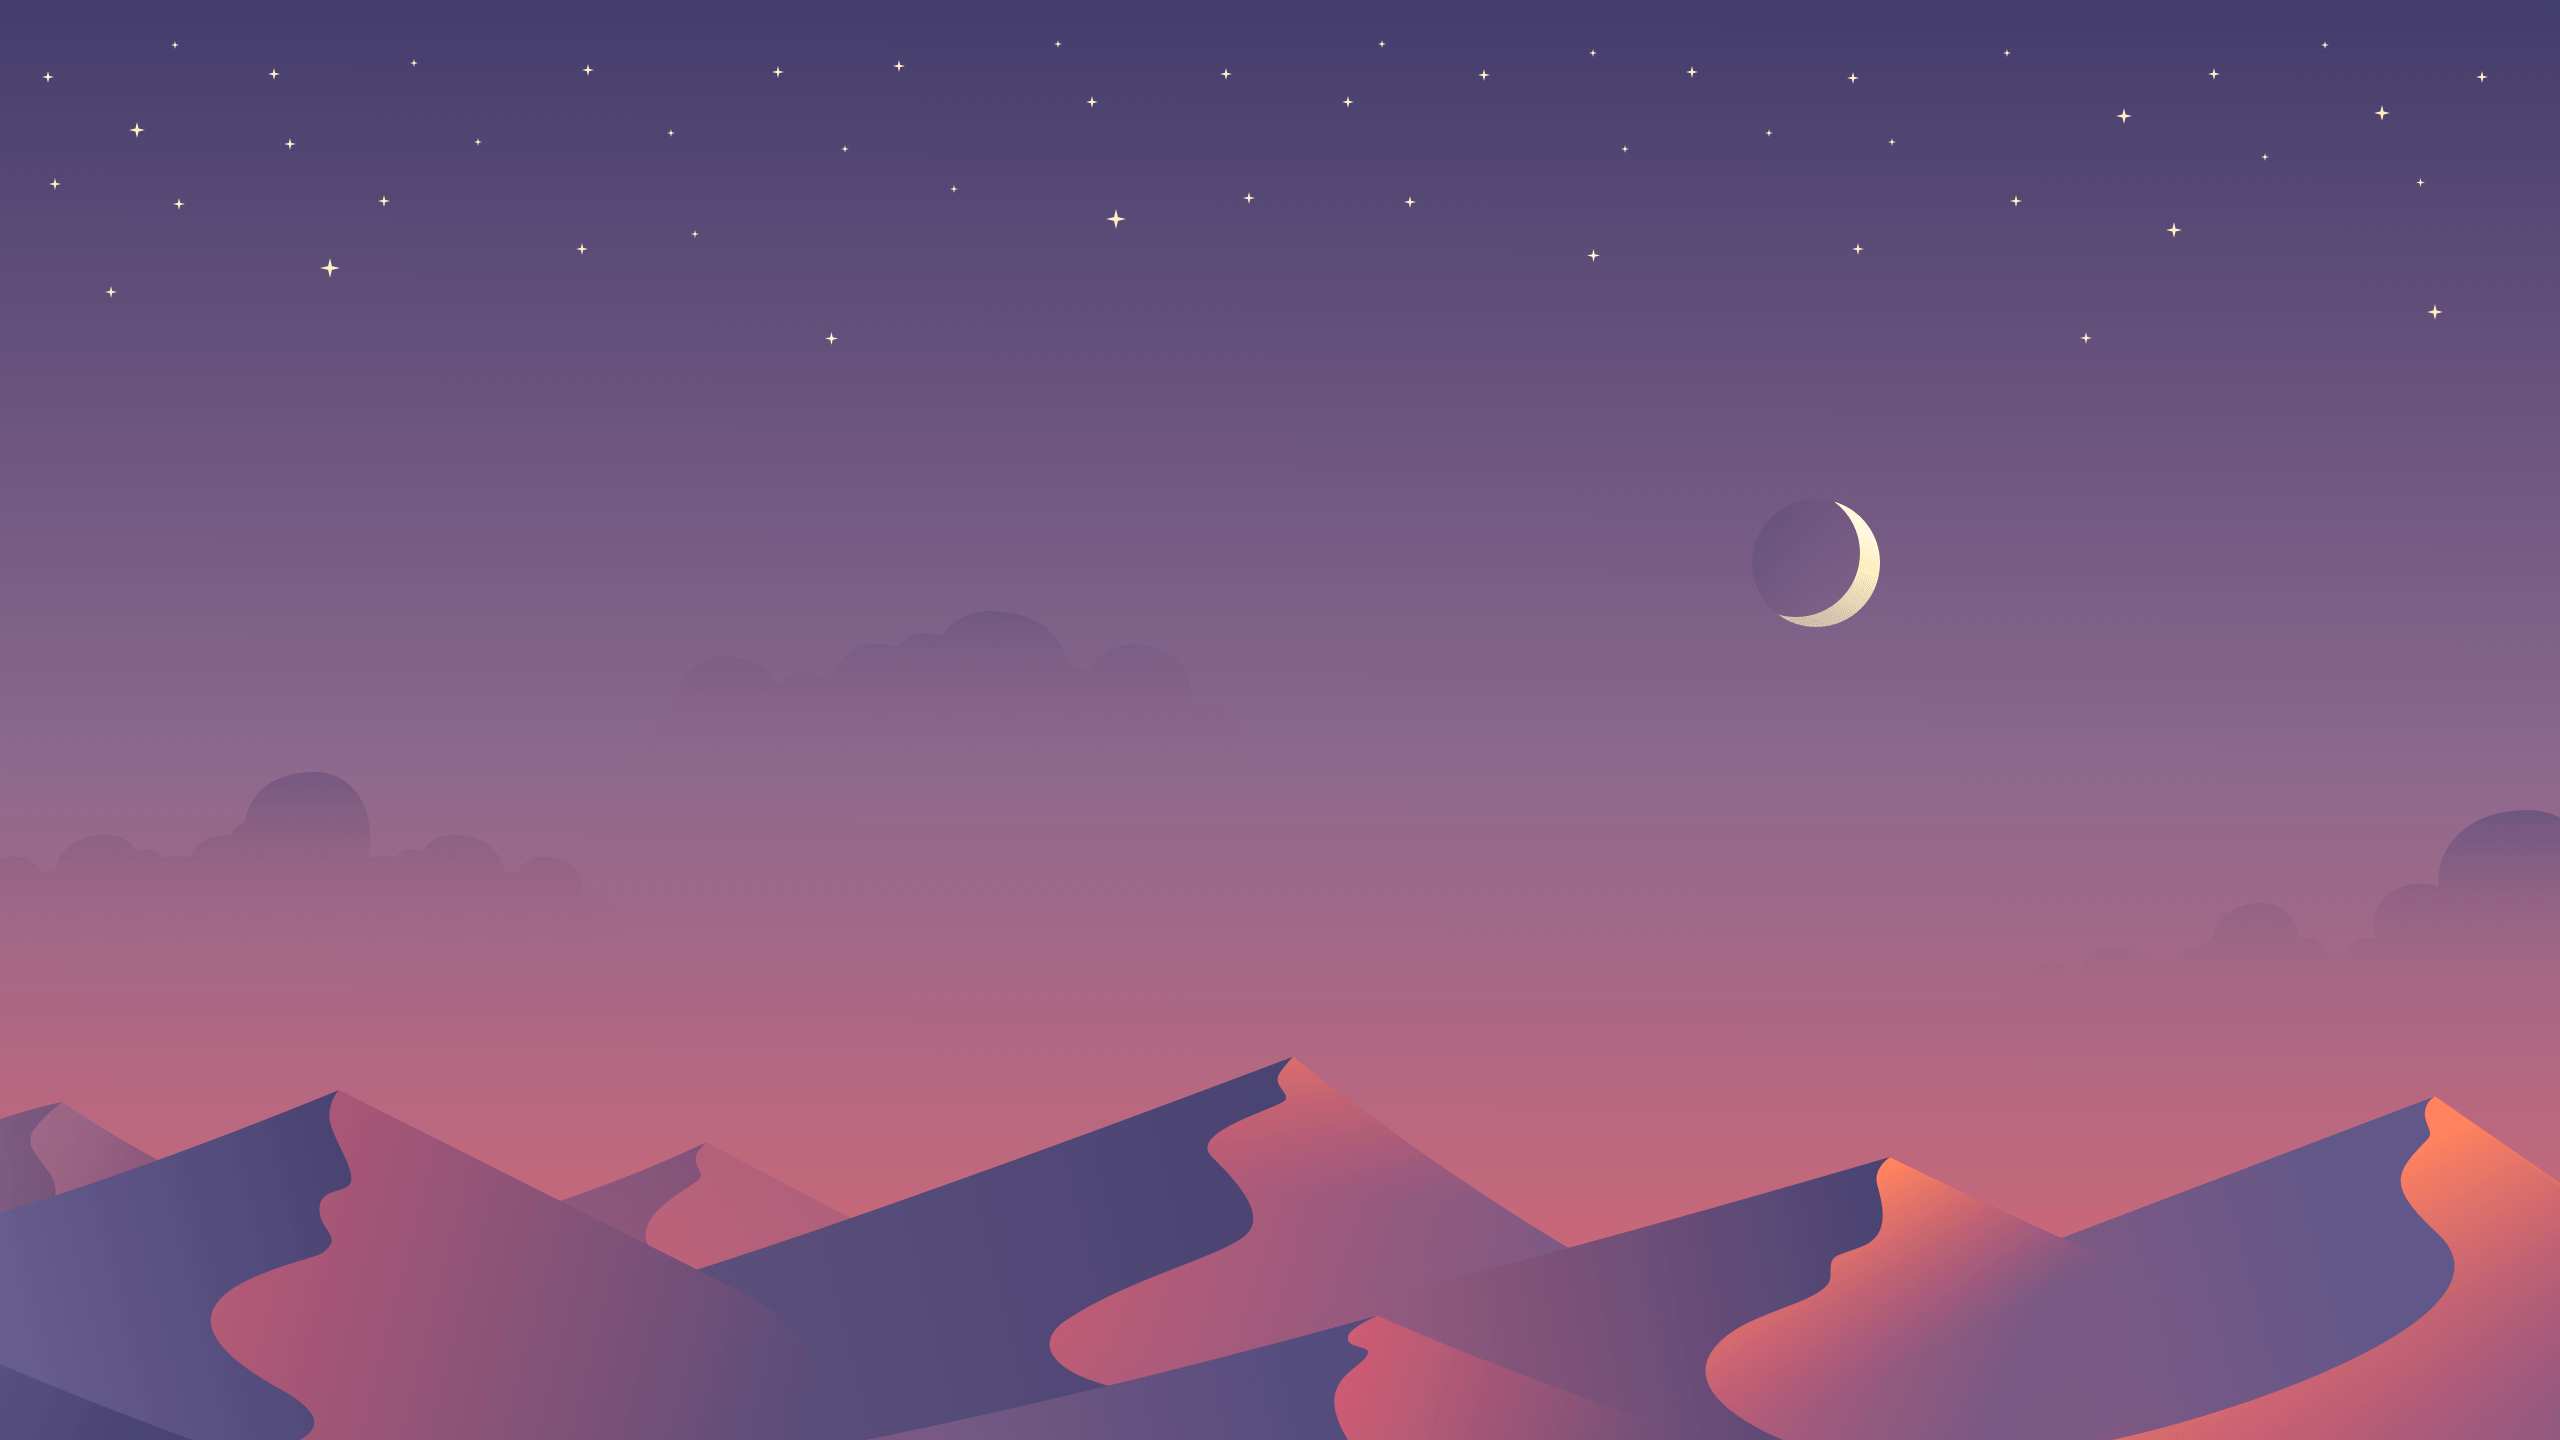 A landscape with mountains and stars in the sky - Desktop, computer, HD, cool, warm